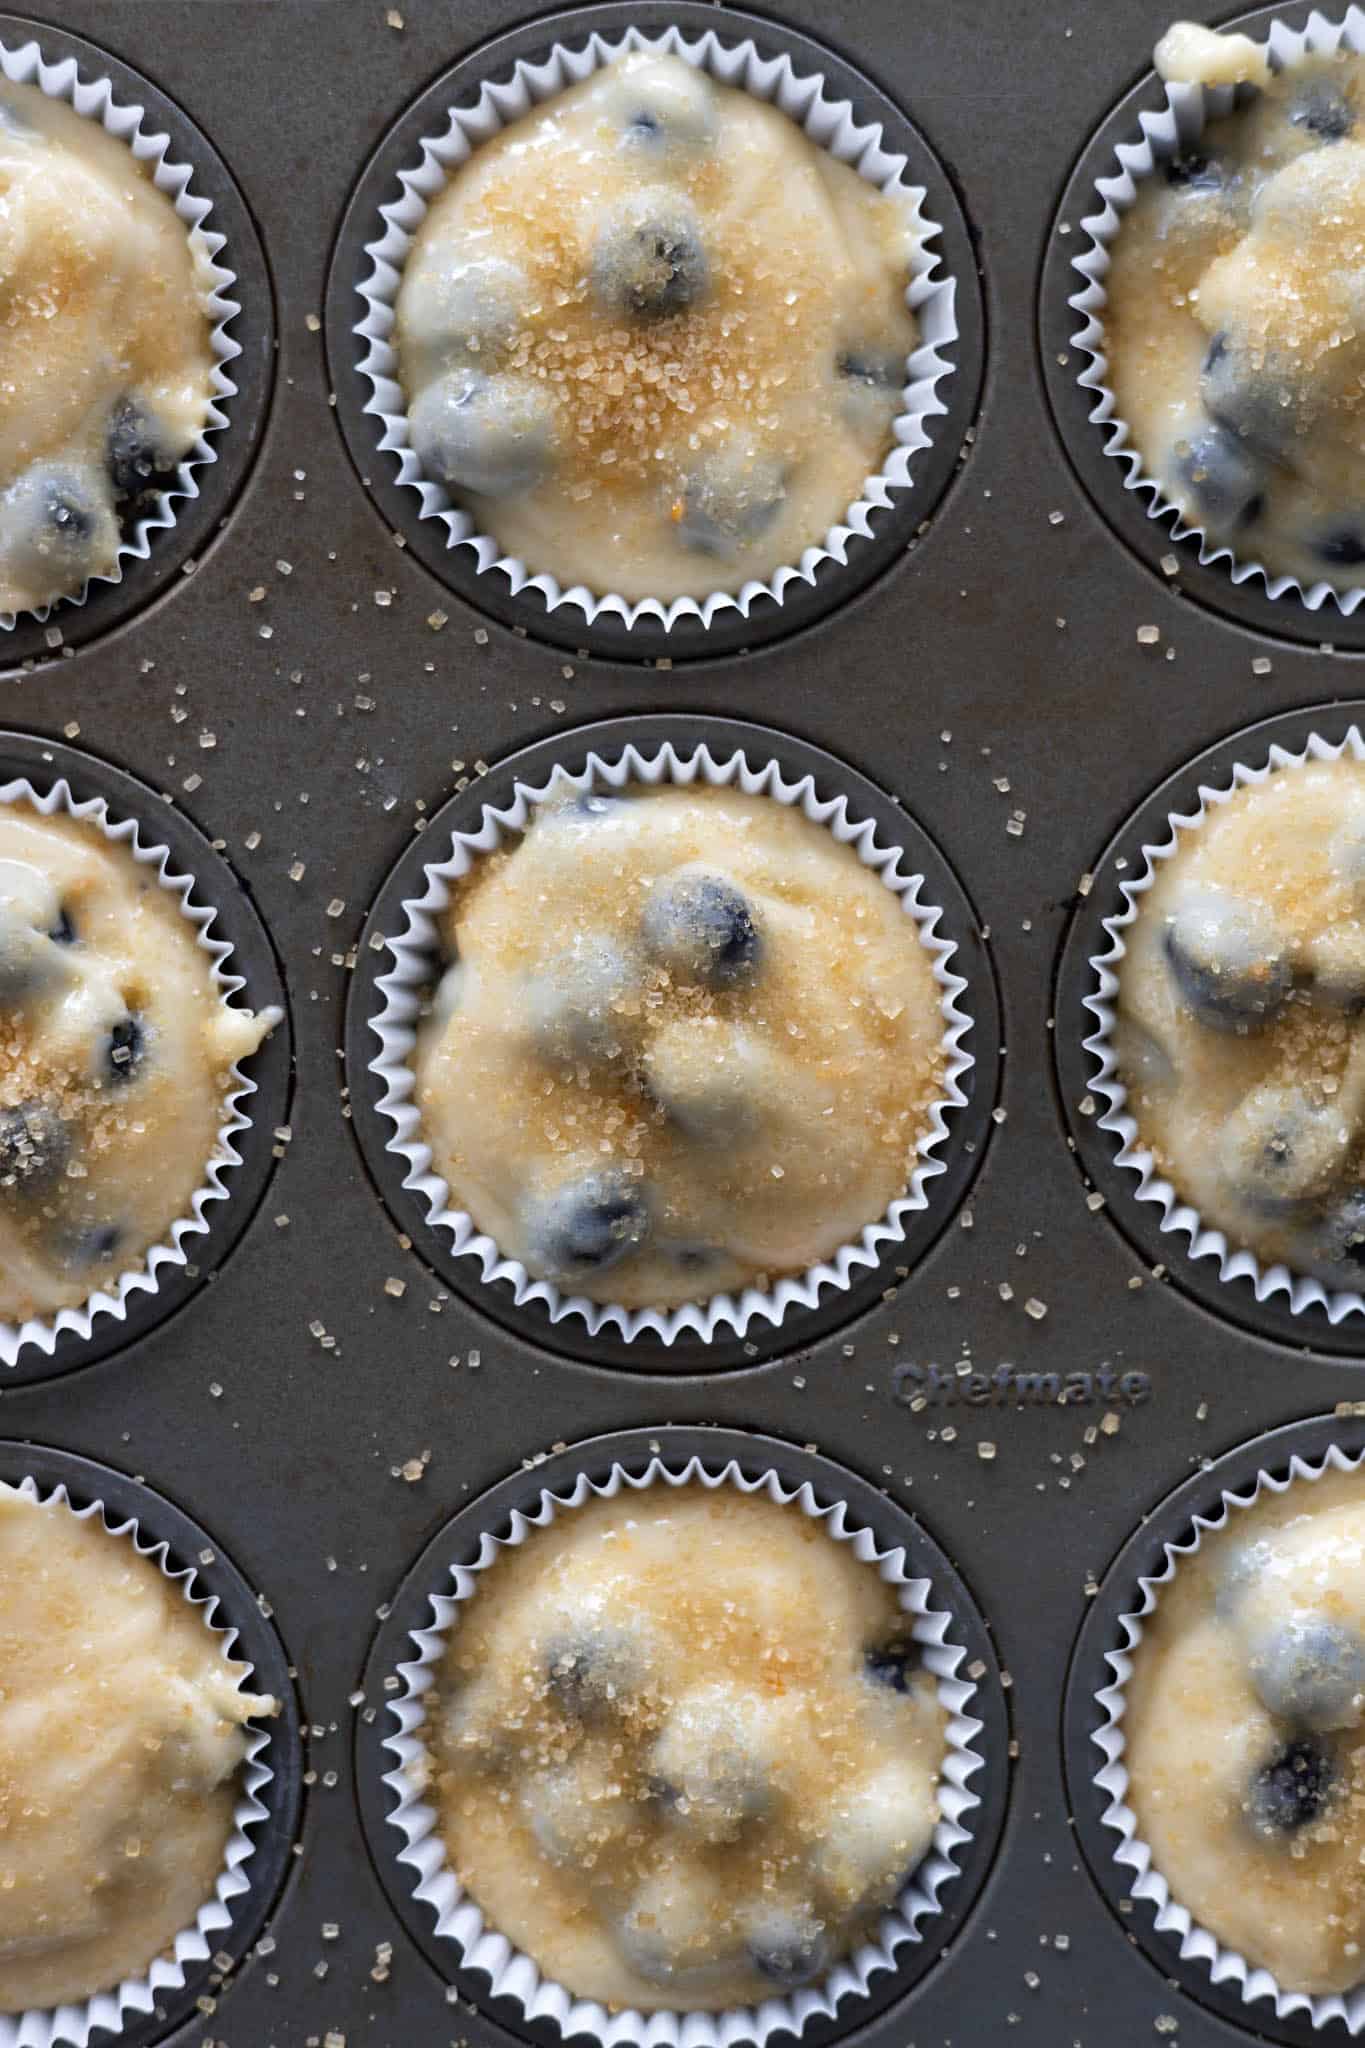 Muffin cups filled with batter and topped with turbinado sugar, ready for baking. 